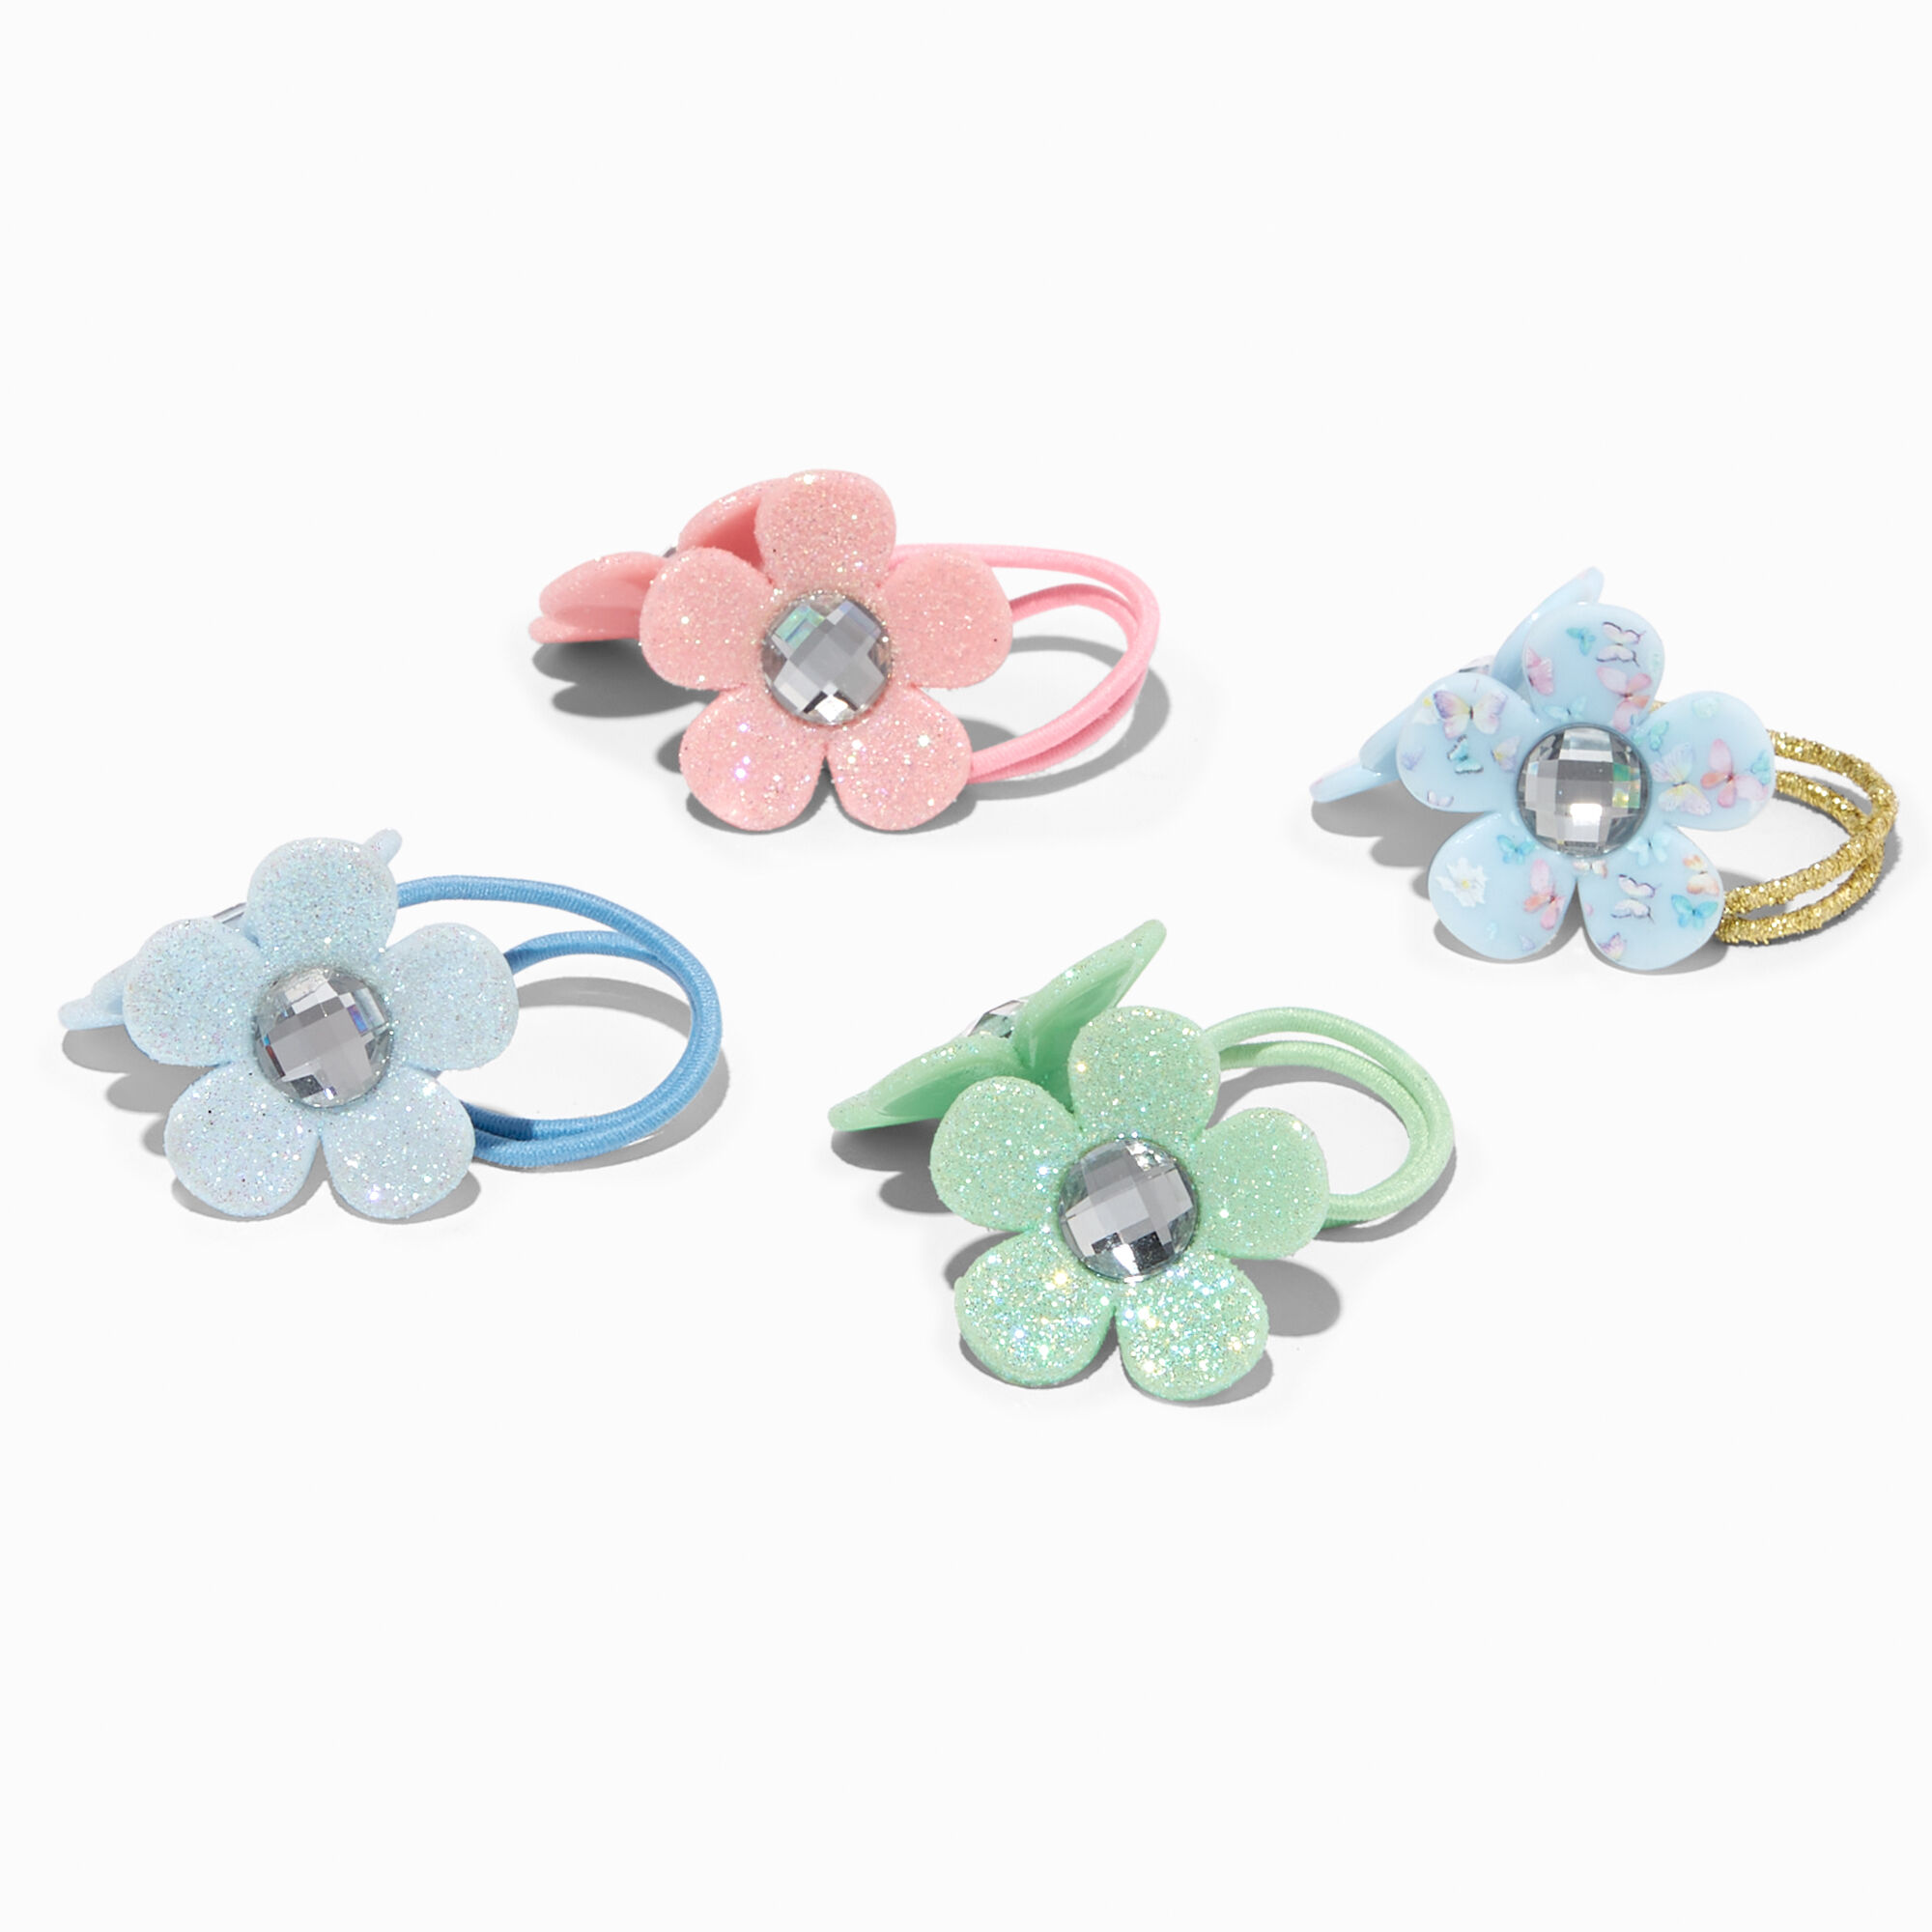 View Claires Club Glitter Flower Hair Bobbles 4 Pack information